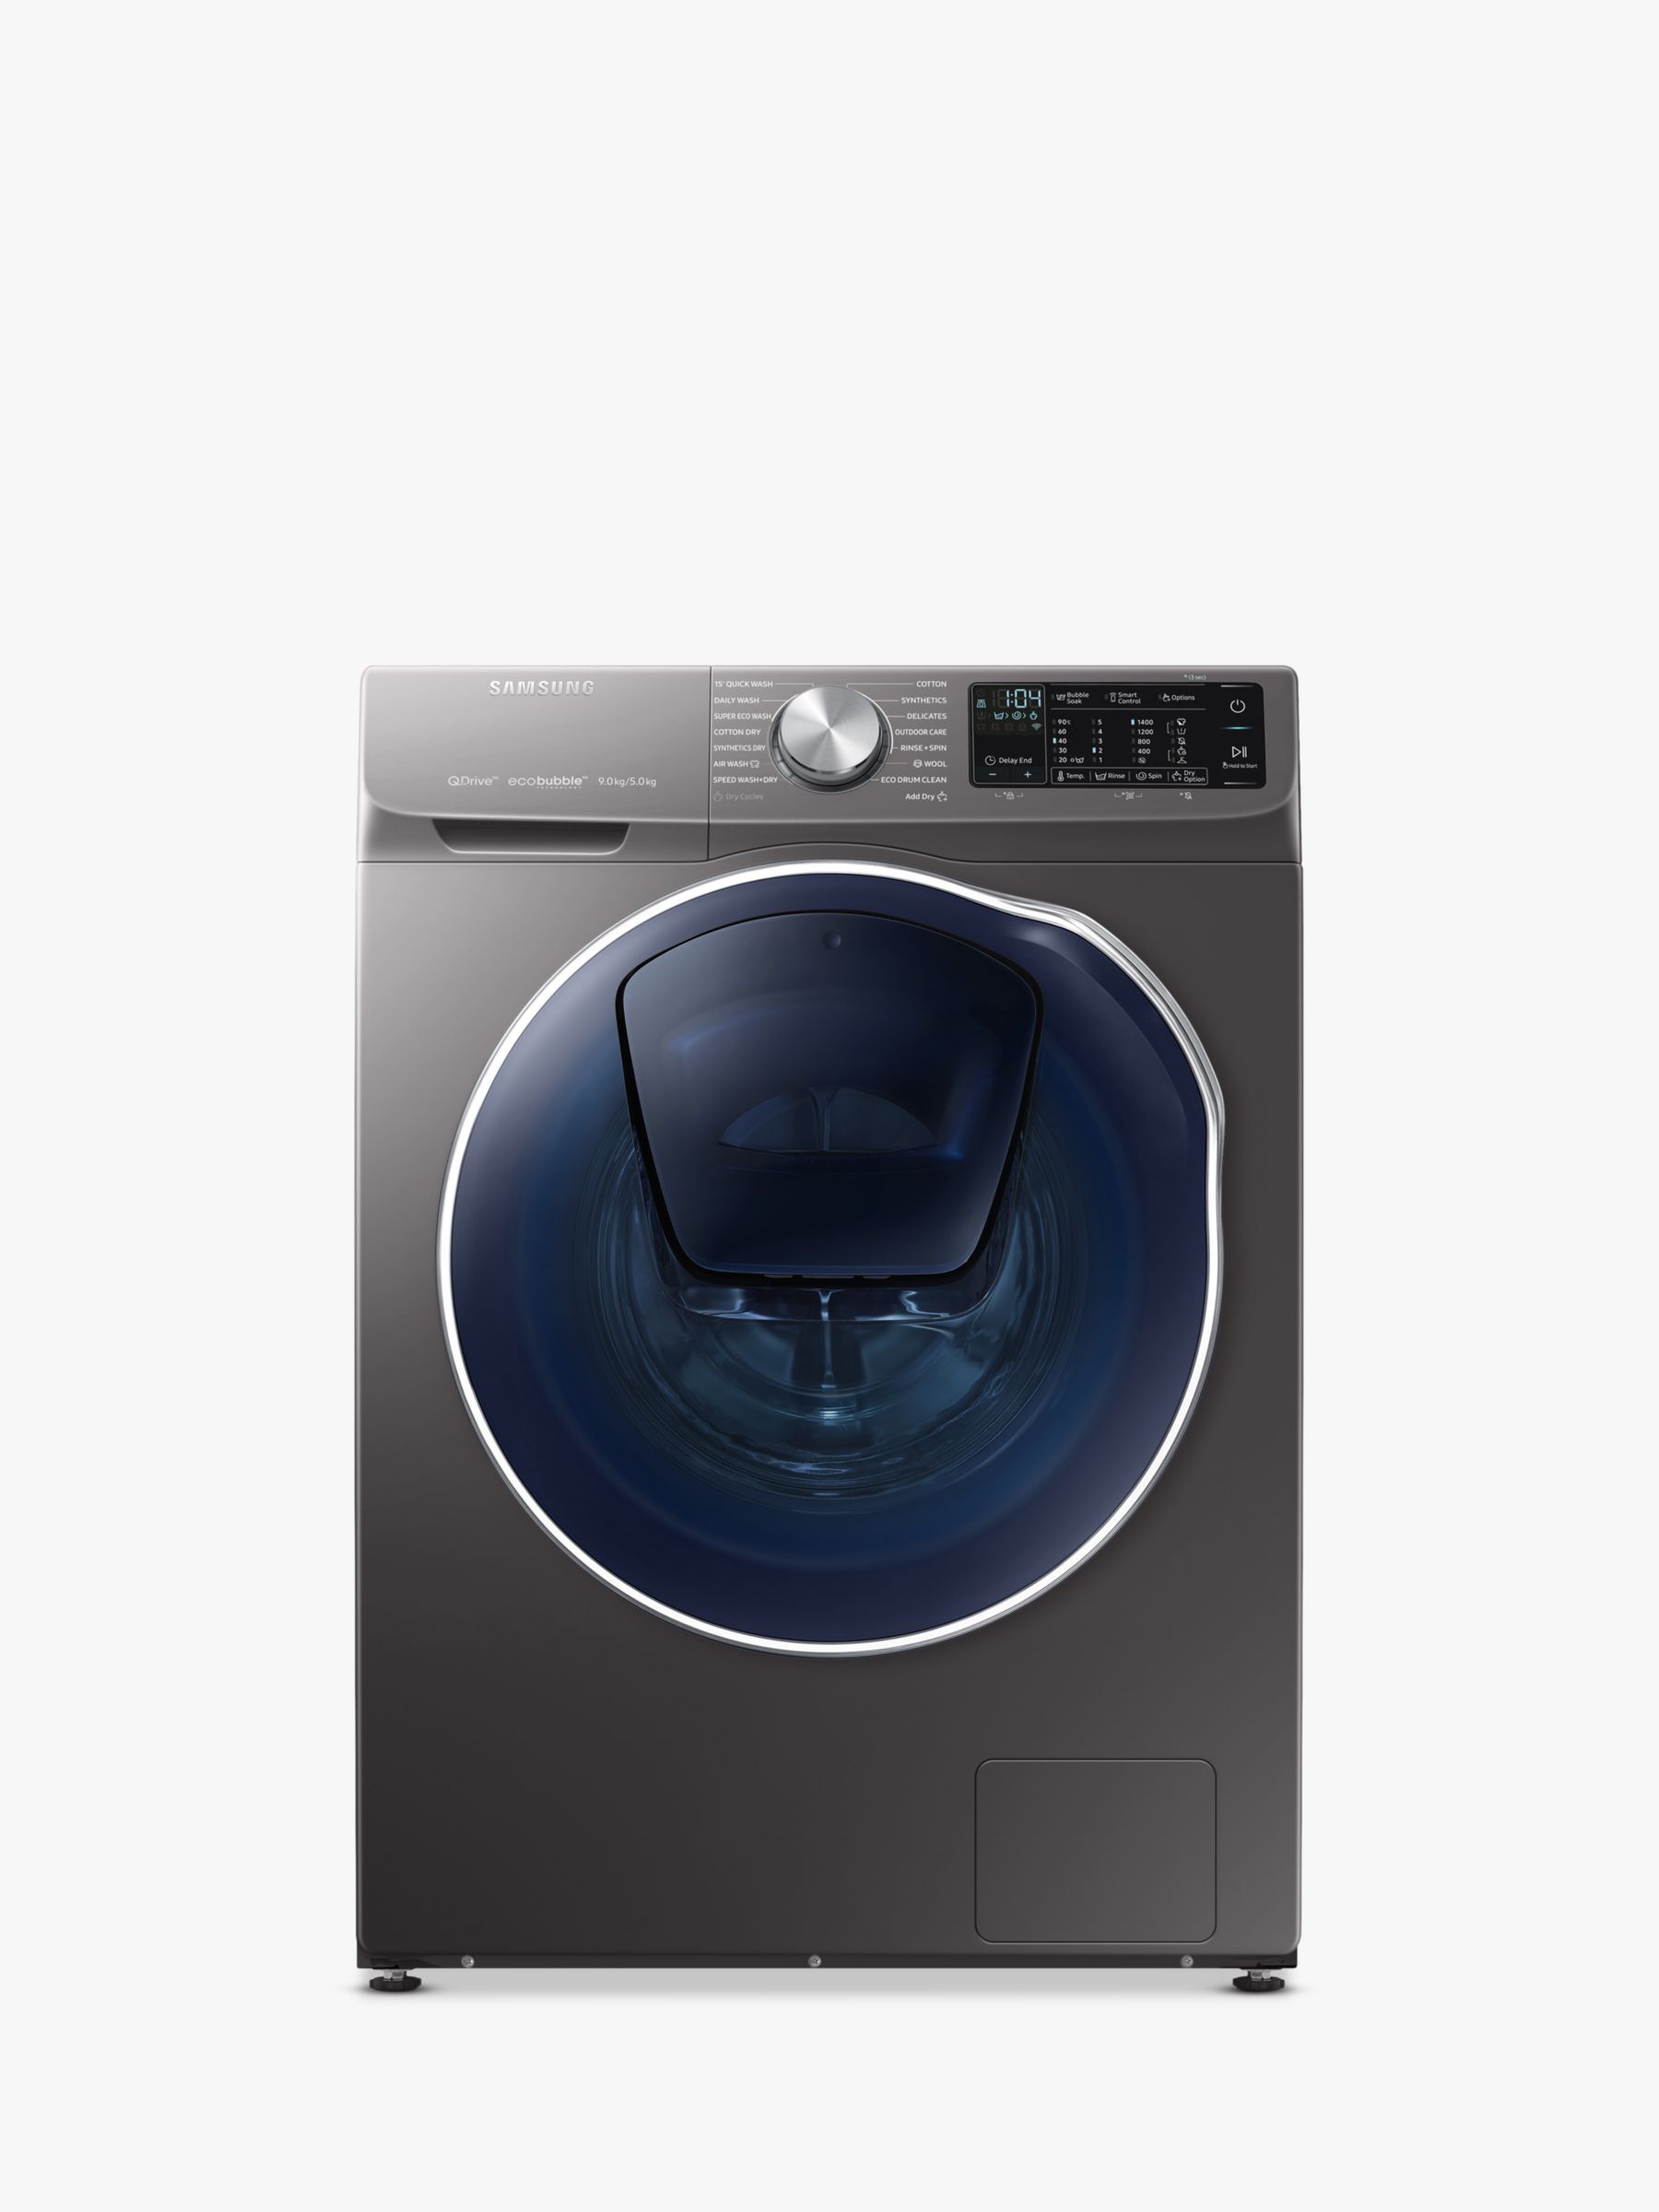 Samsung QuickDrive WD90N645OOX/EU Freestanding Washer Dryer with AddWash, 9kg Wash/5kg Dry Load, A Energy Rating, 1400rpm Spin, Graphite